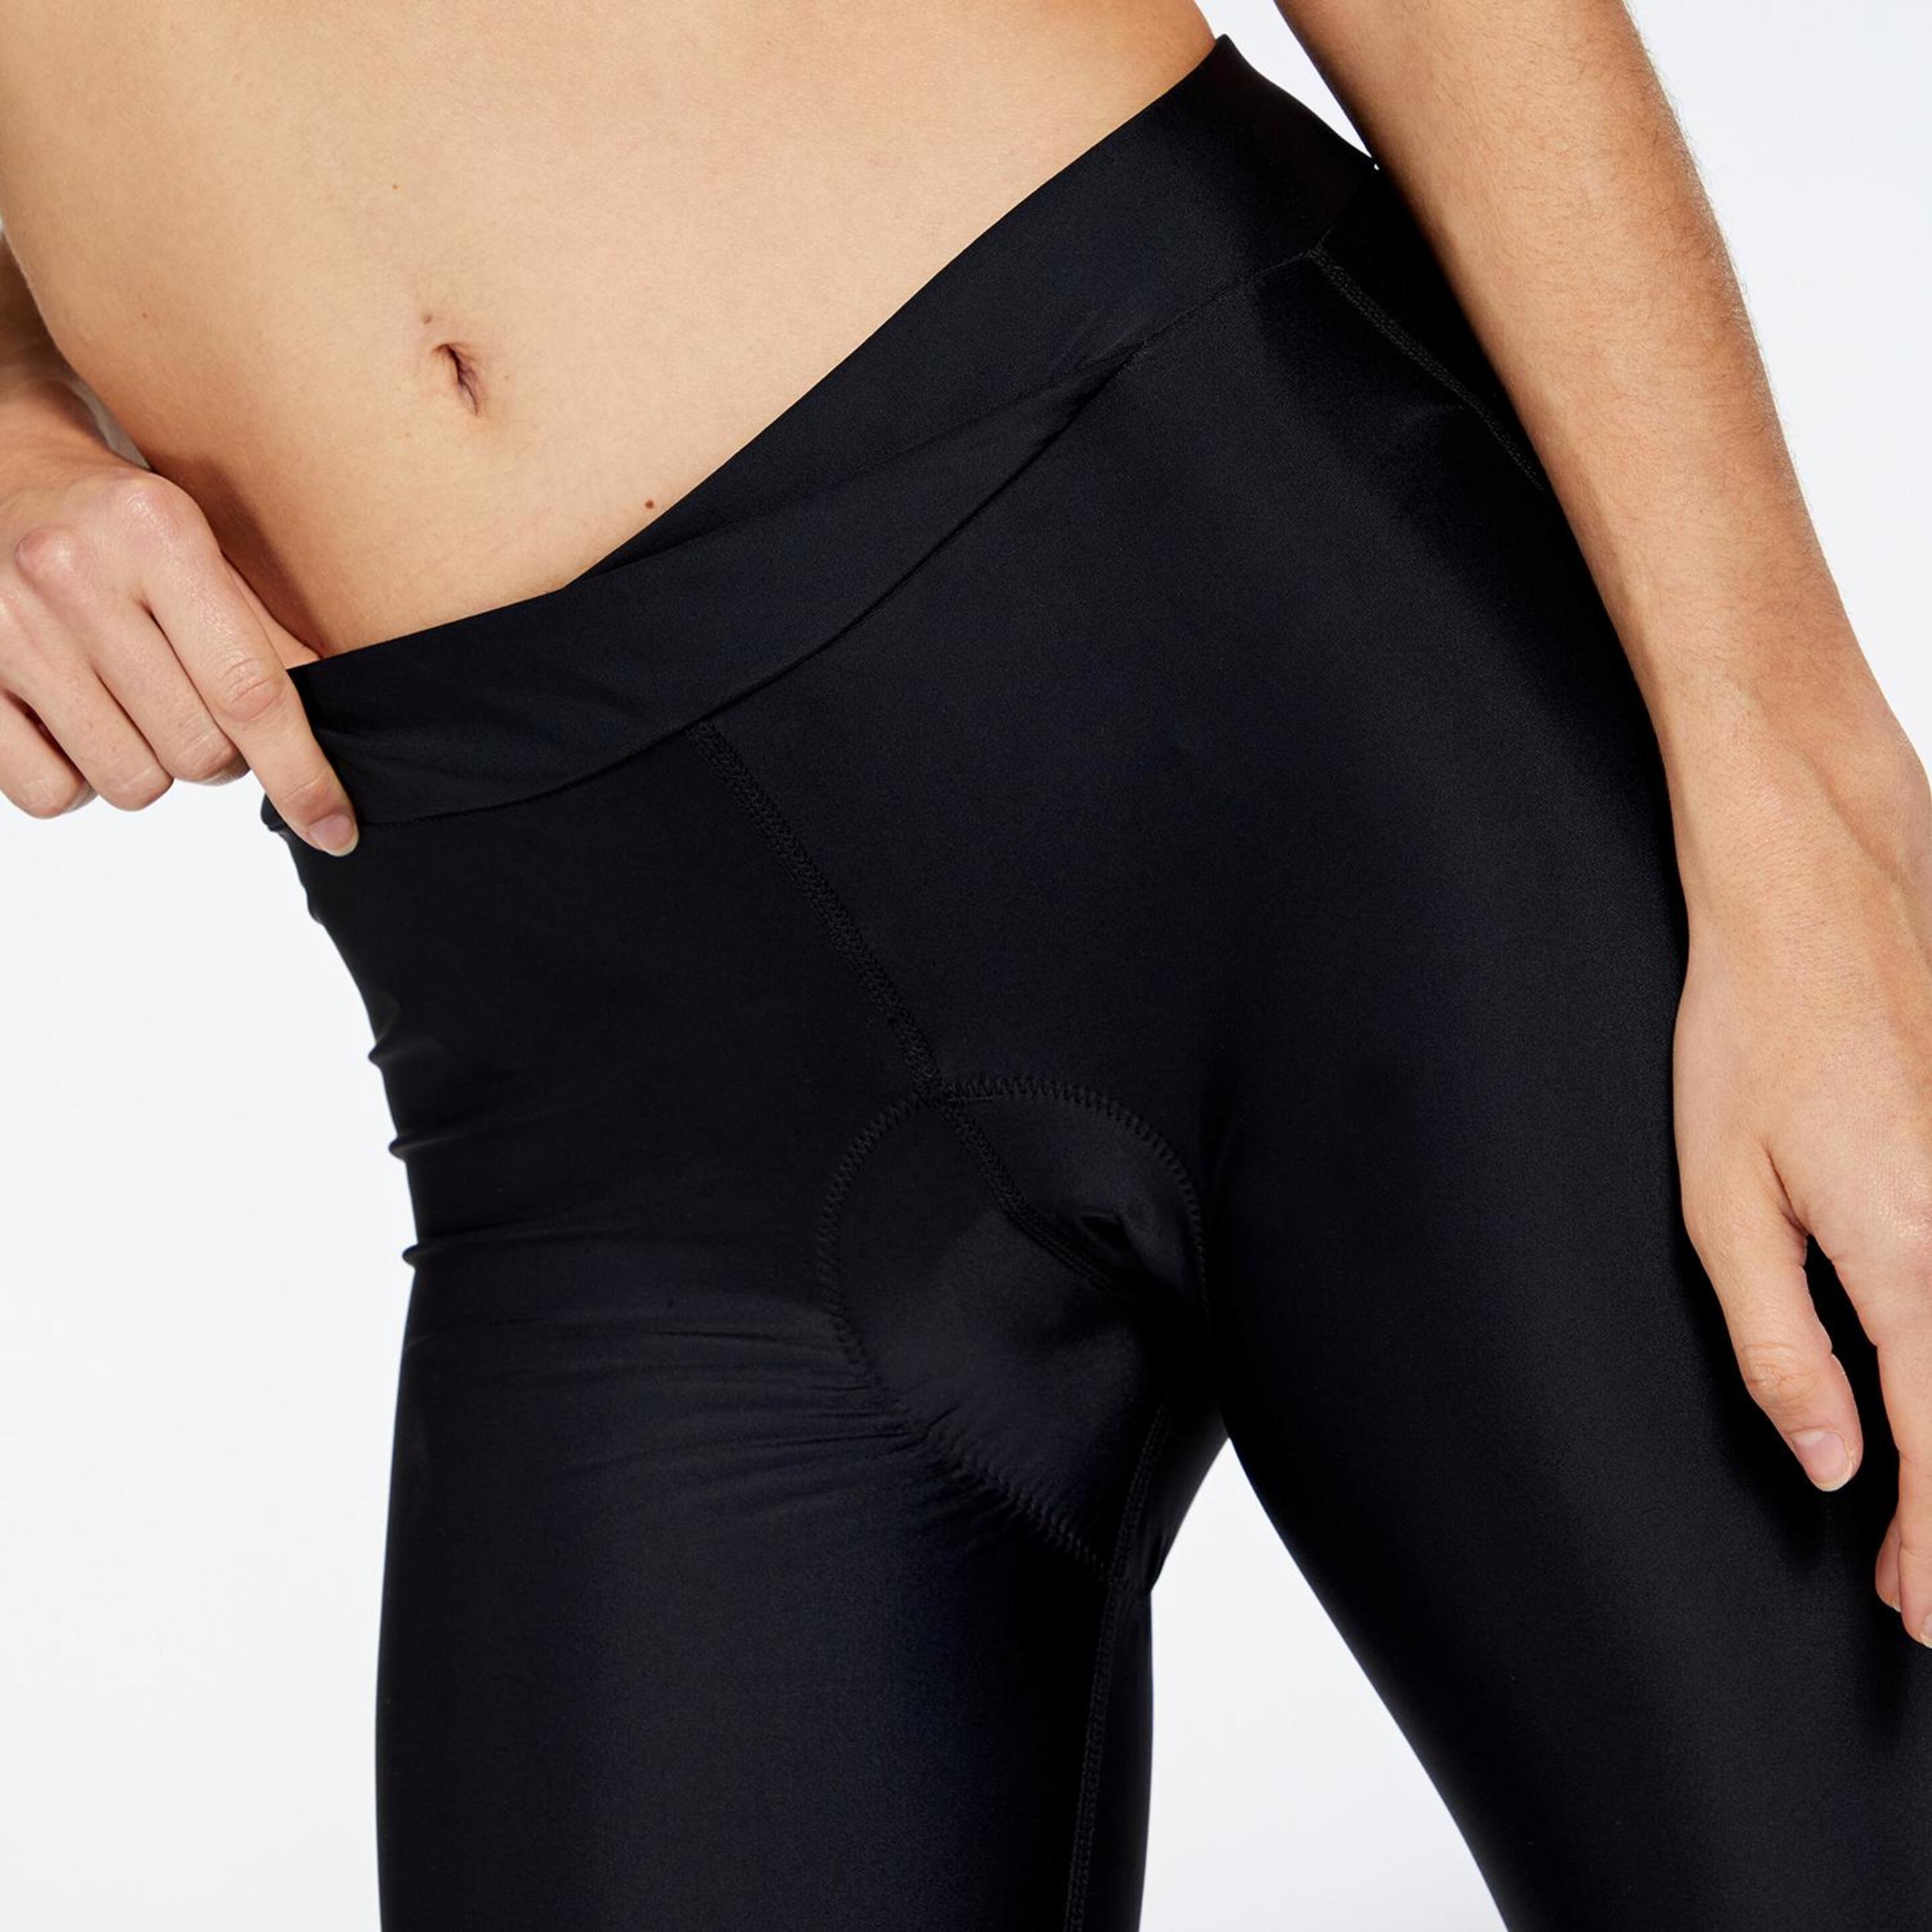 Dare2B Worldly Gel - Negro - Culotte Ciclismo Mujer